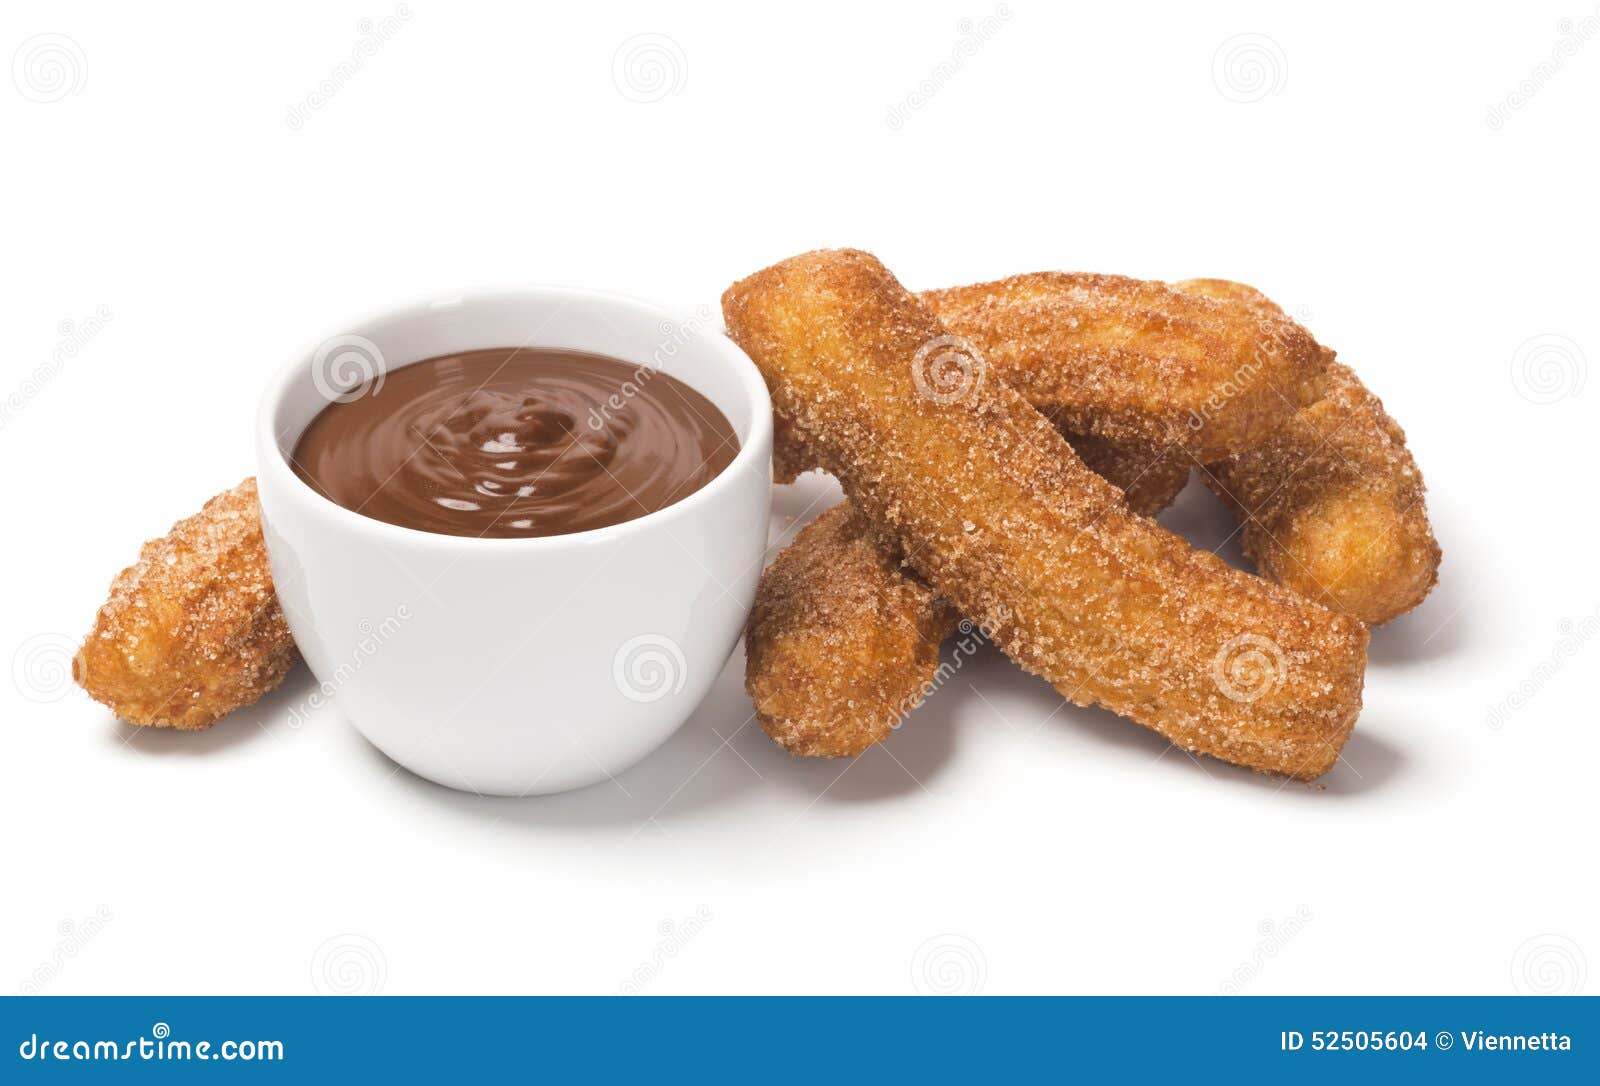 churros with chocolate on white background